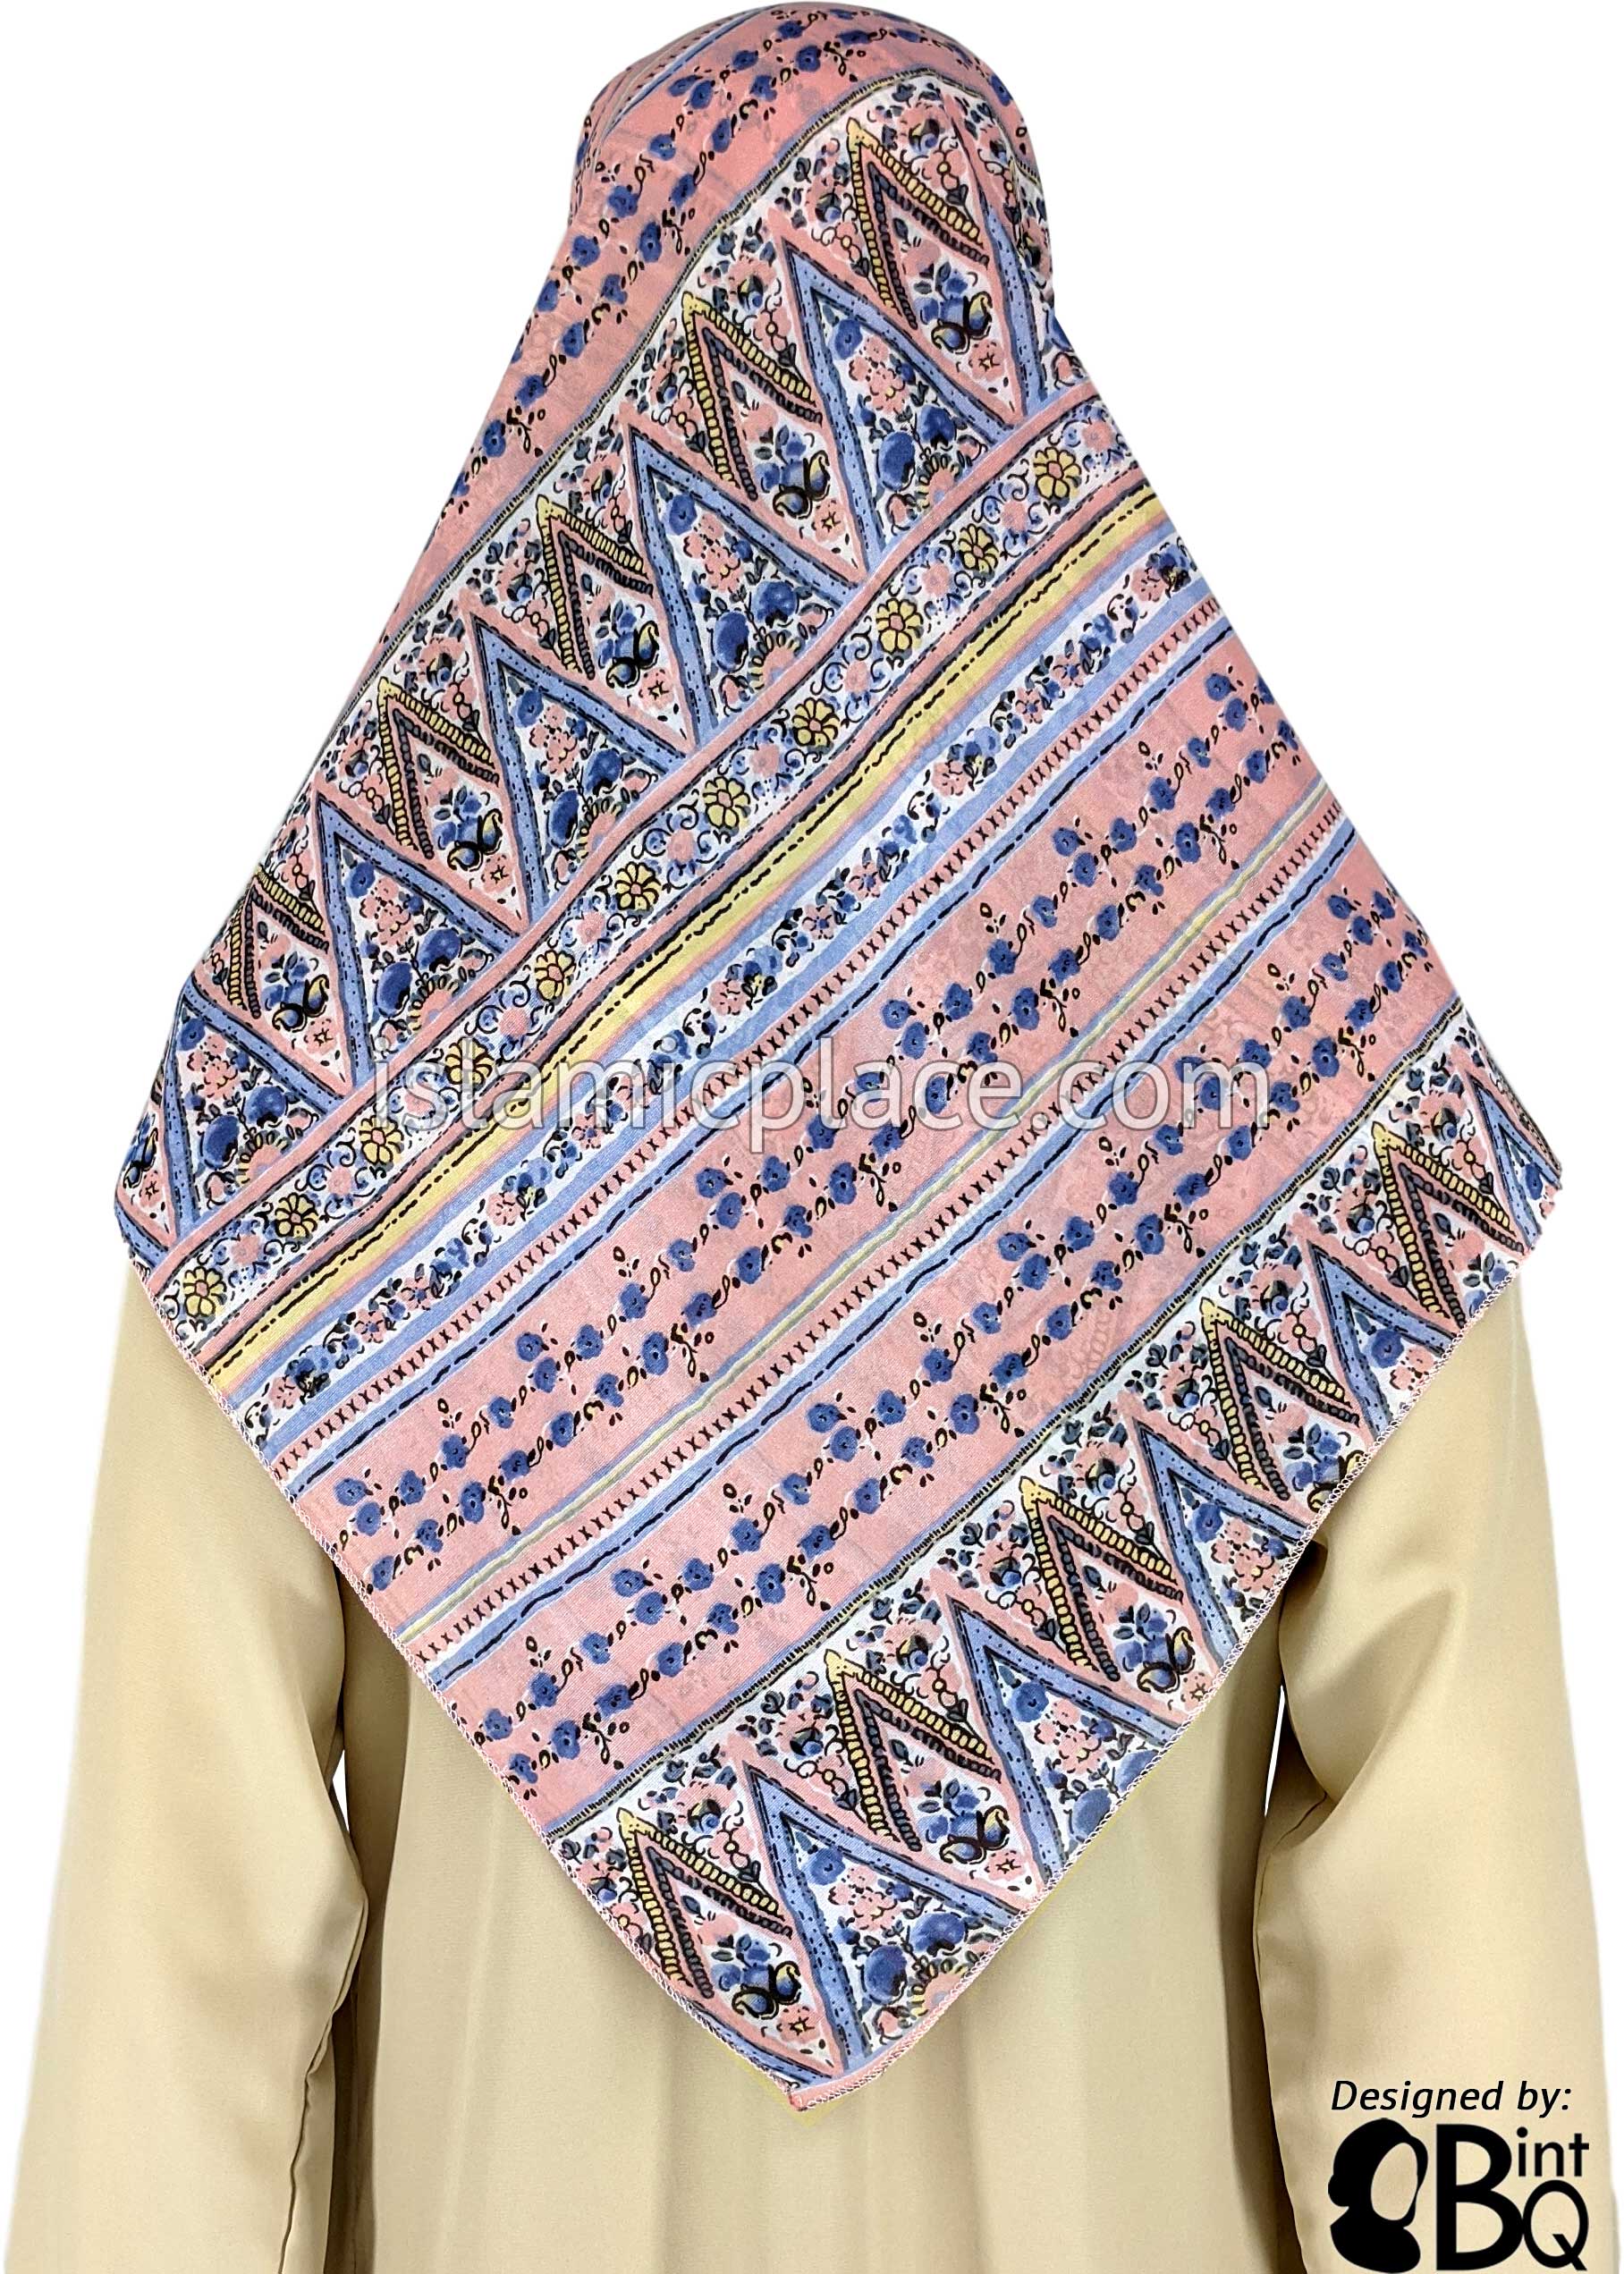 Blue, Yellow, White And Black Water Color Floral Design On Pink - 45" Square Printed Khimar